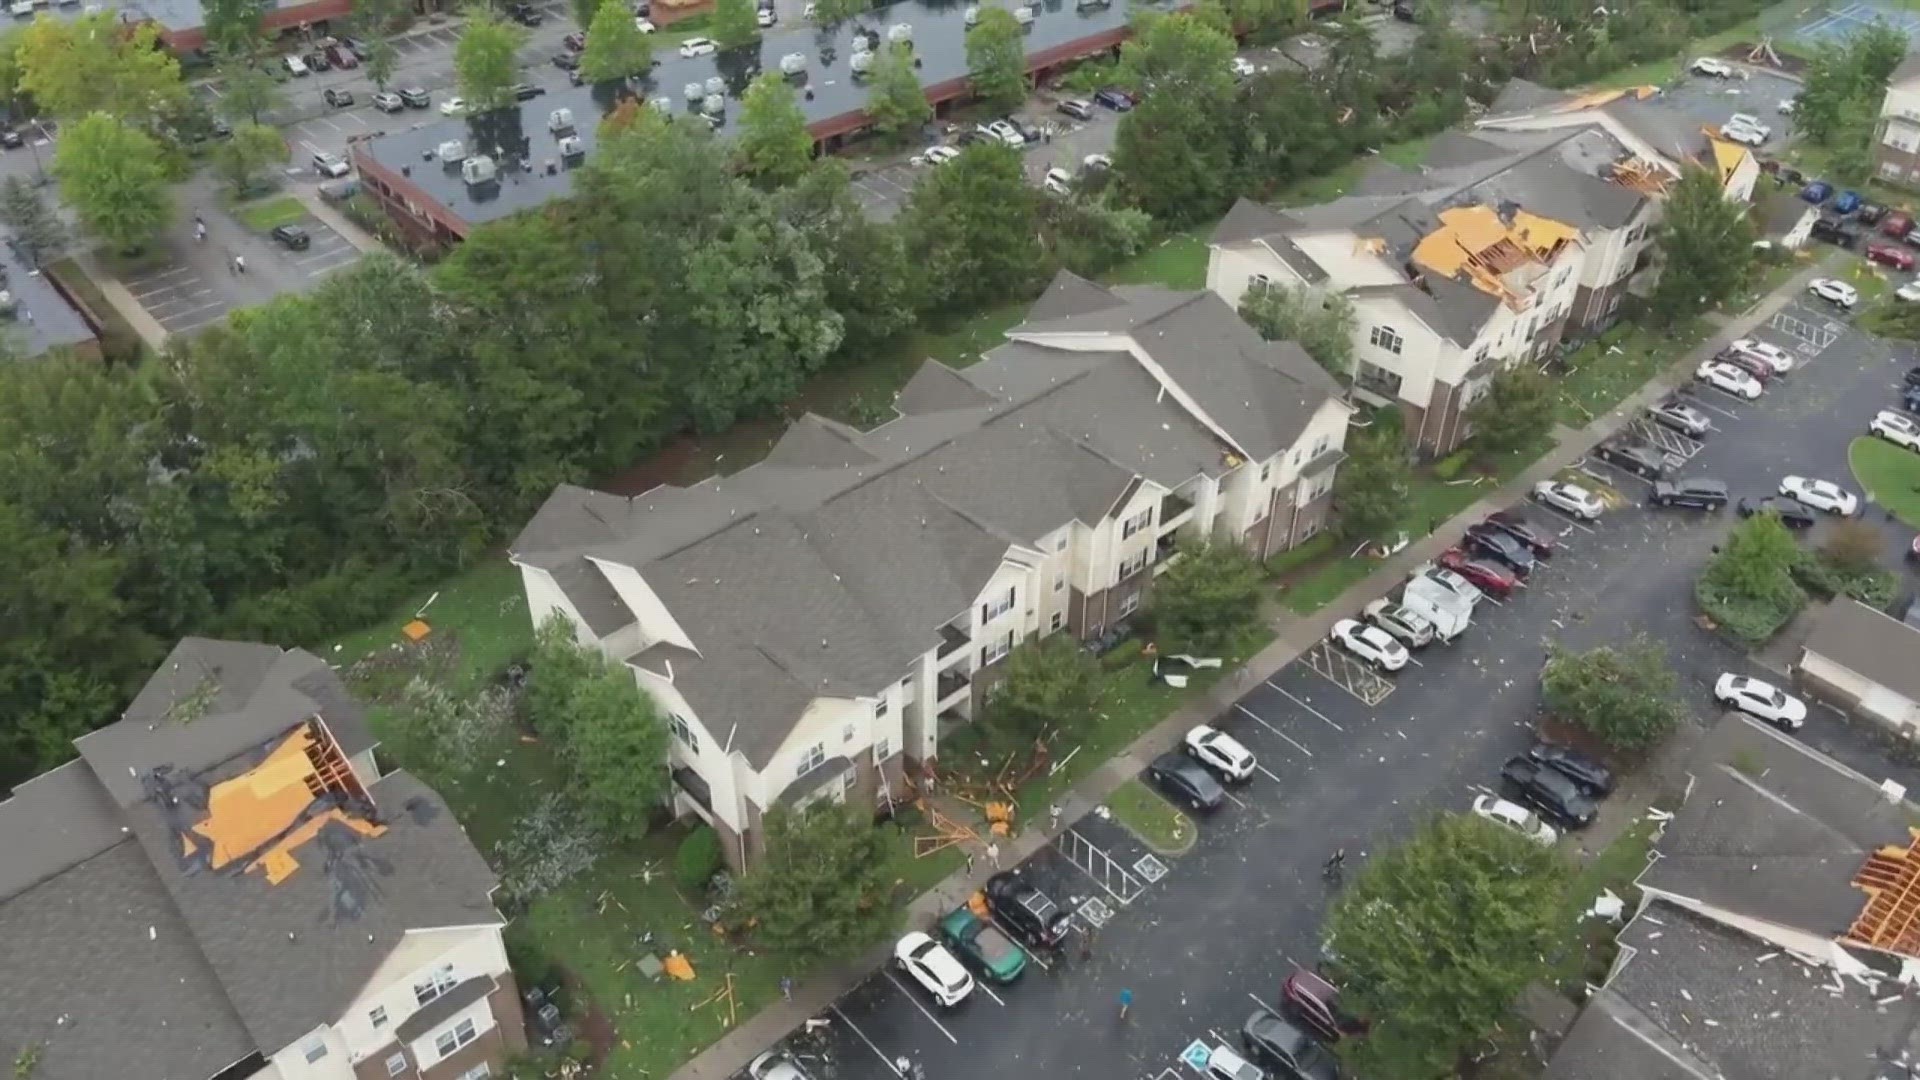 An EF-2 tornado damaged several buildings at the West Knox County apartment complex earlier in August.